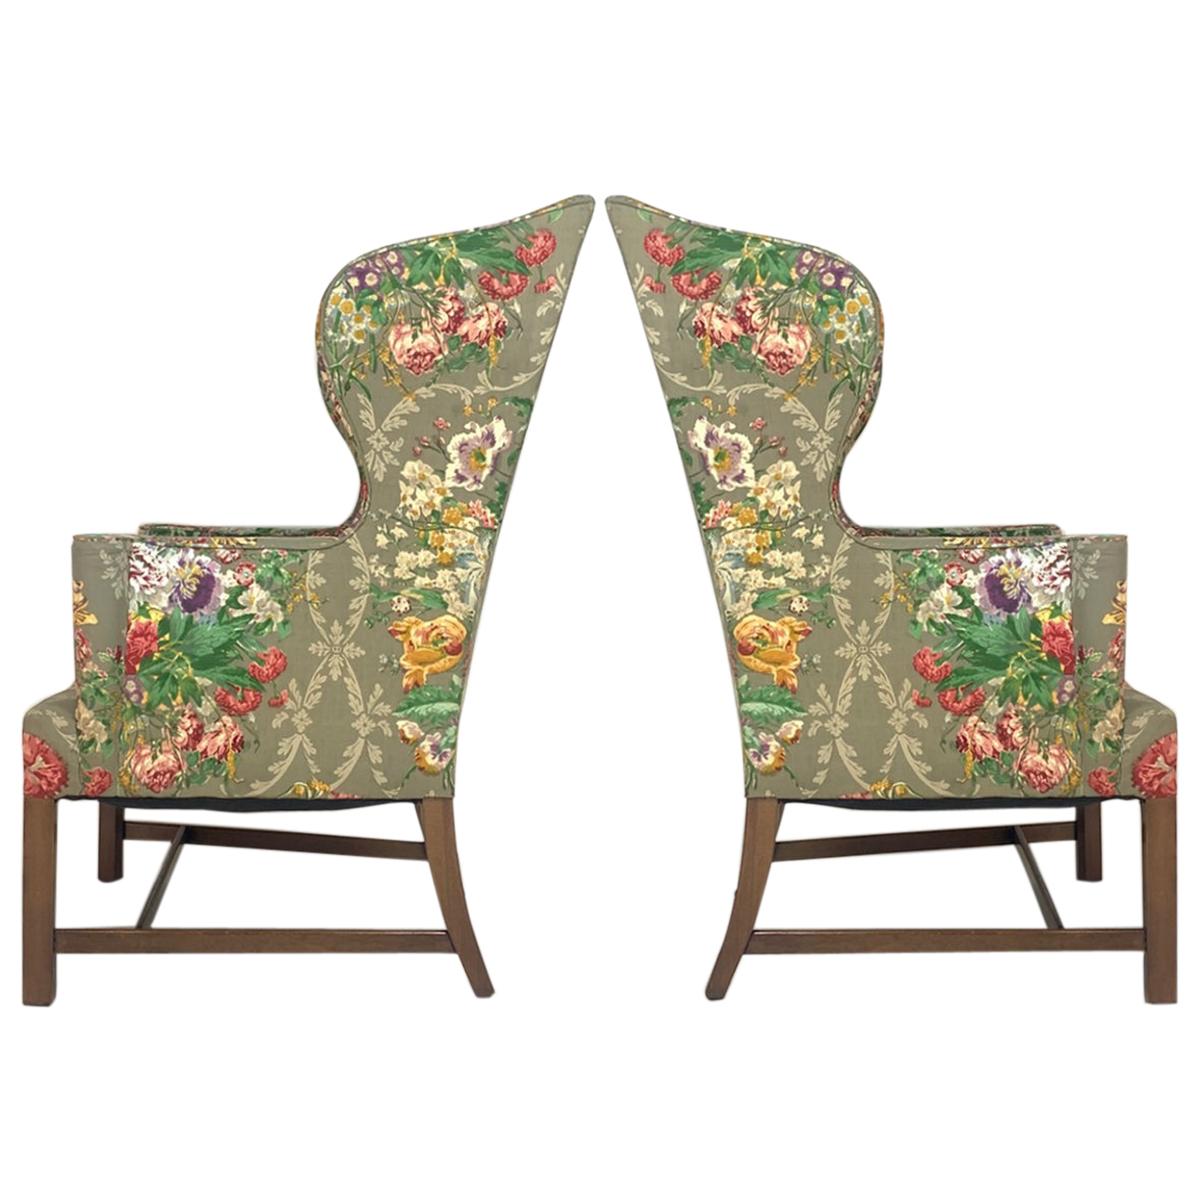 Exceptional Early American Wingback Chairs with Stunning Floral Upholstery